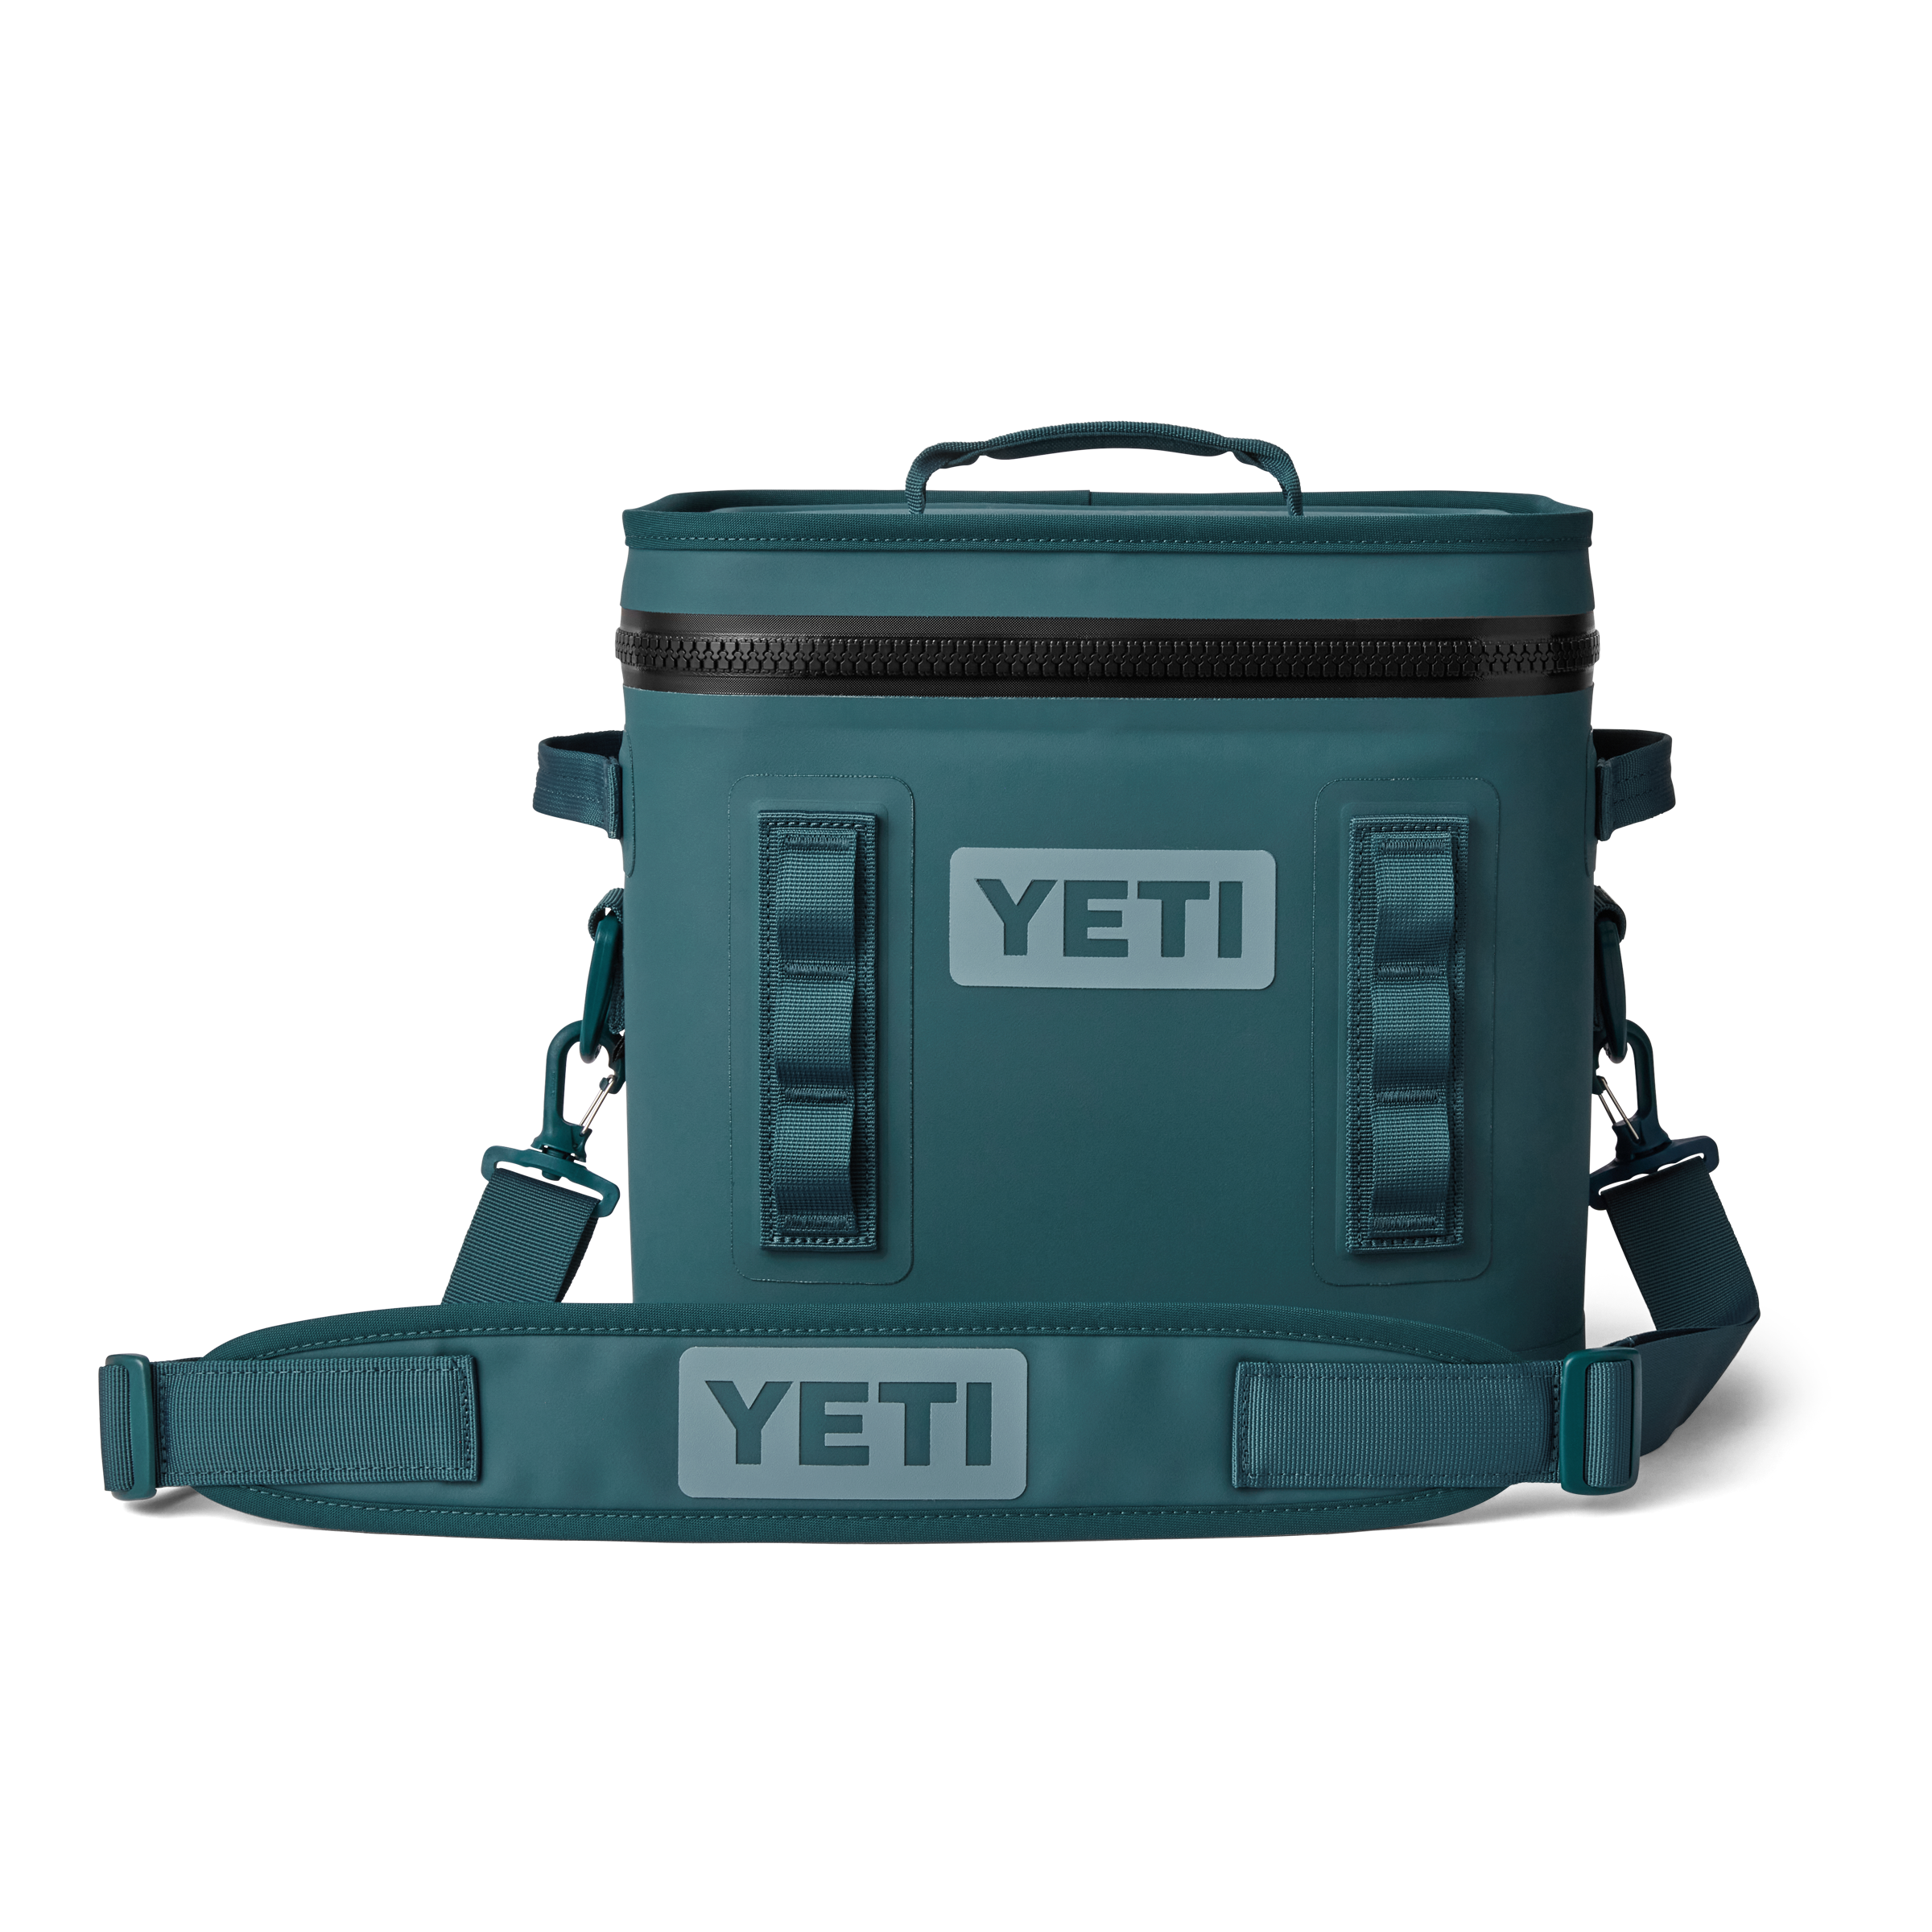 cooler bag, yeti, dryhide shell, coldcell insulation, hydrolok zipper